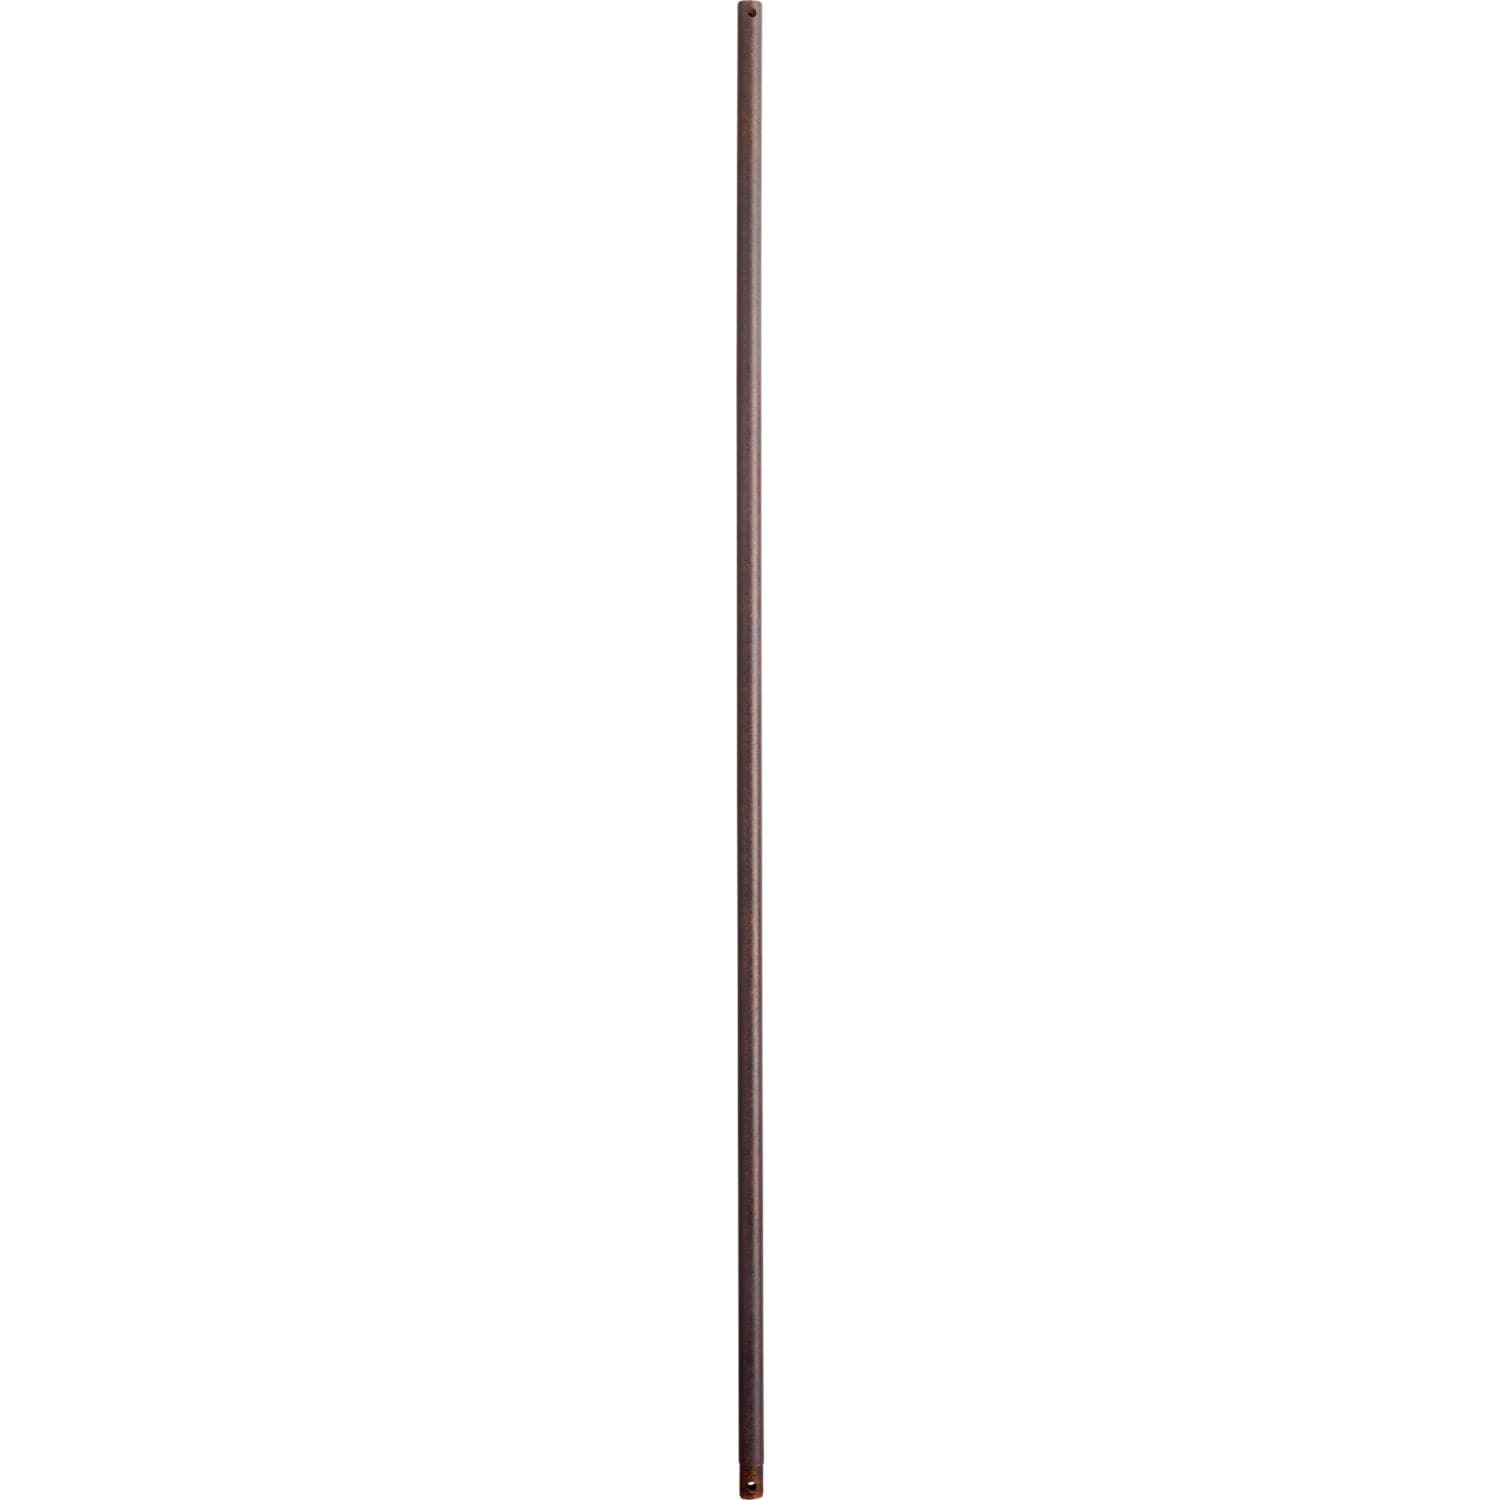 Quorum - 6-4844 - 48" Universal Downrod - 48 in. Downrods - Toasted Sienna